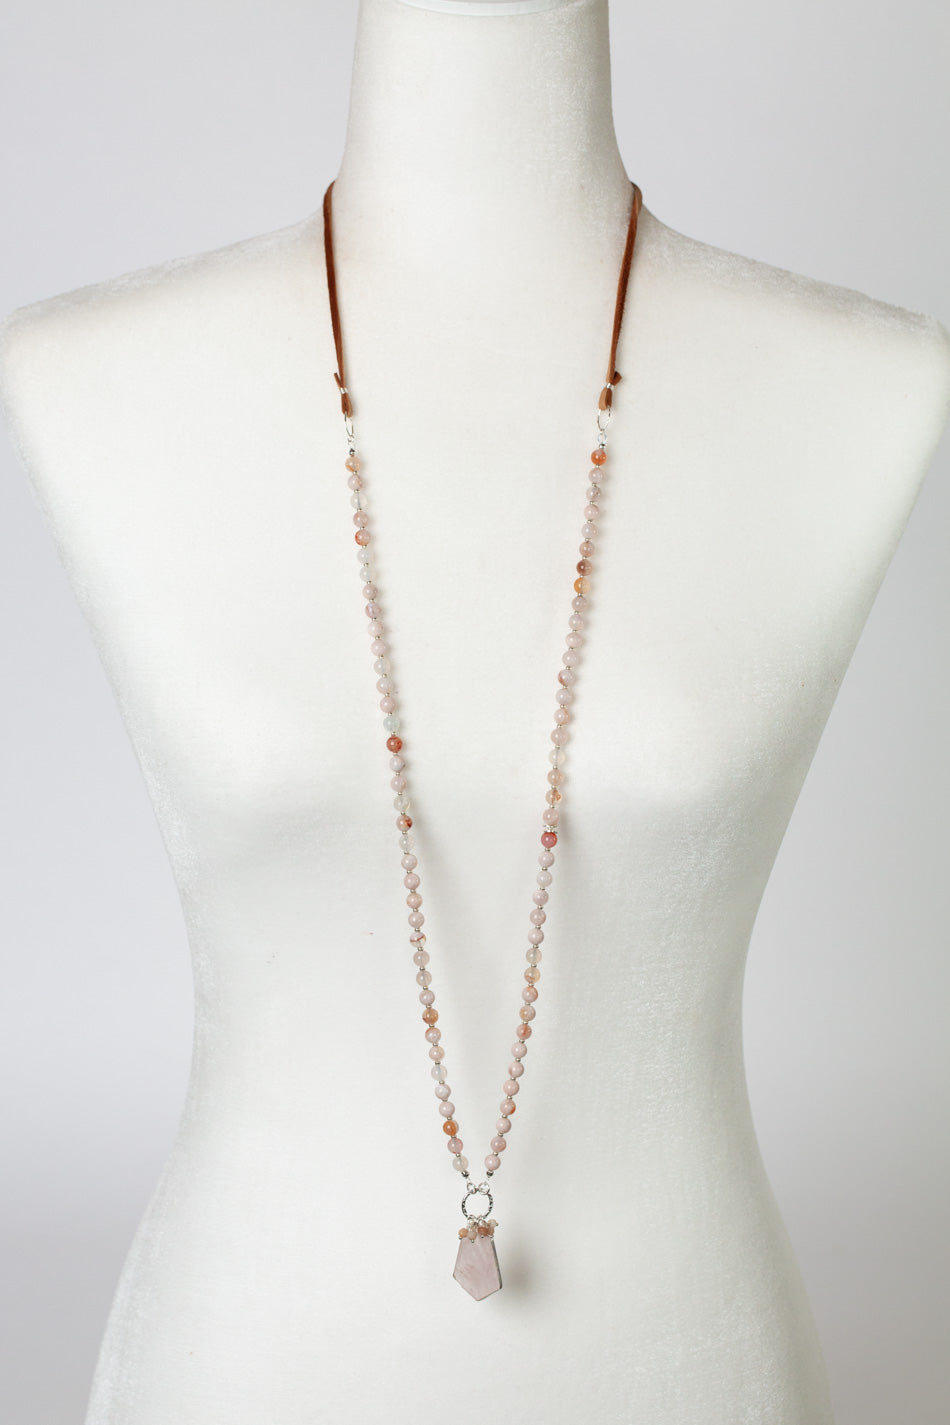 Embrace Adjustable Cherry Blossom Agate, Pink Opal With Faceted Rose Quartz Statement Necklace